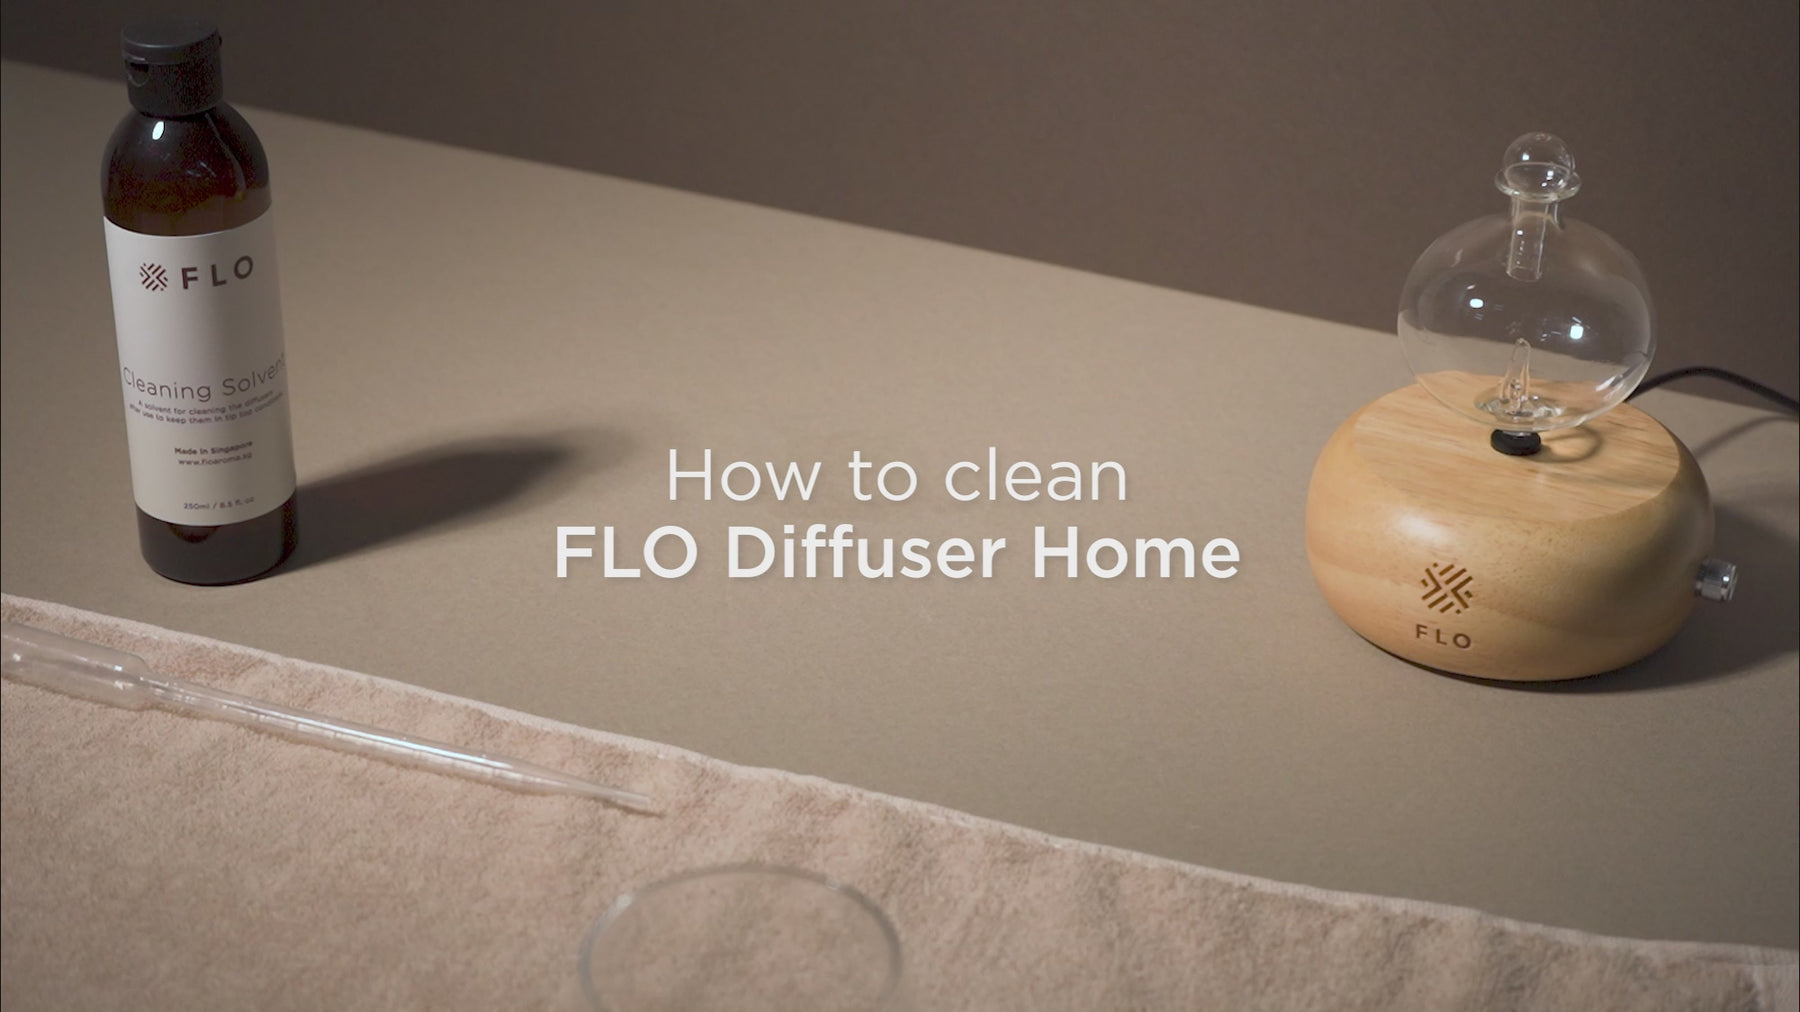 How to clean the FLO Diffuser Home.